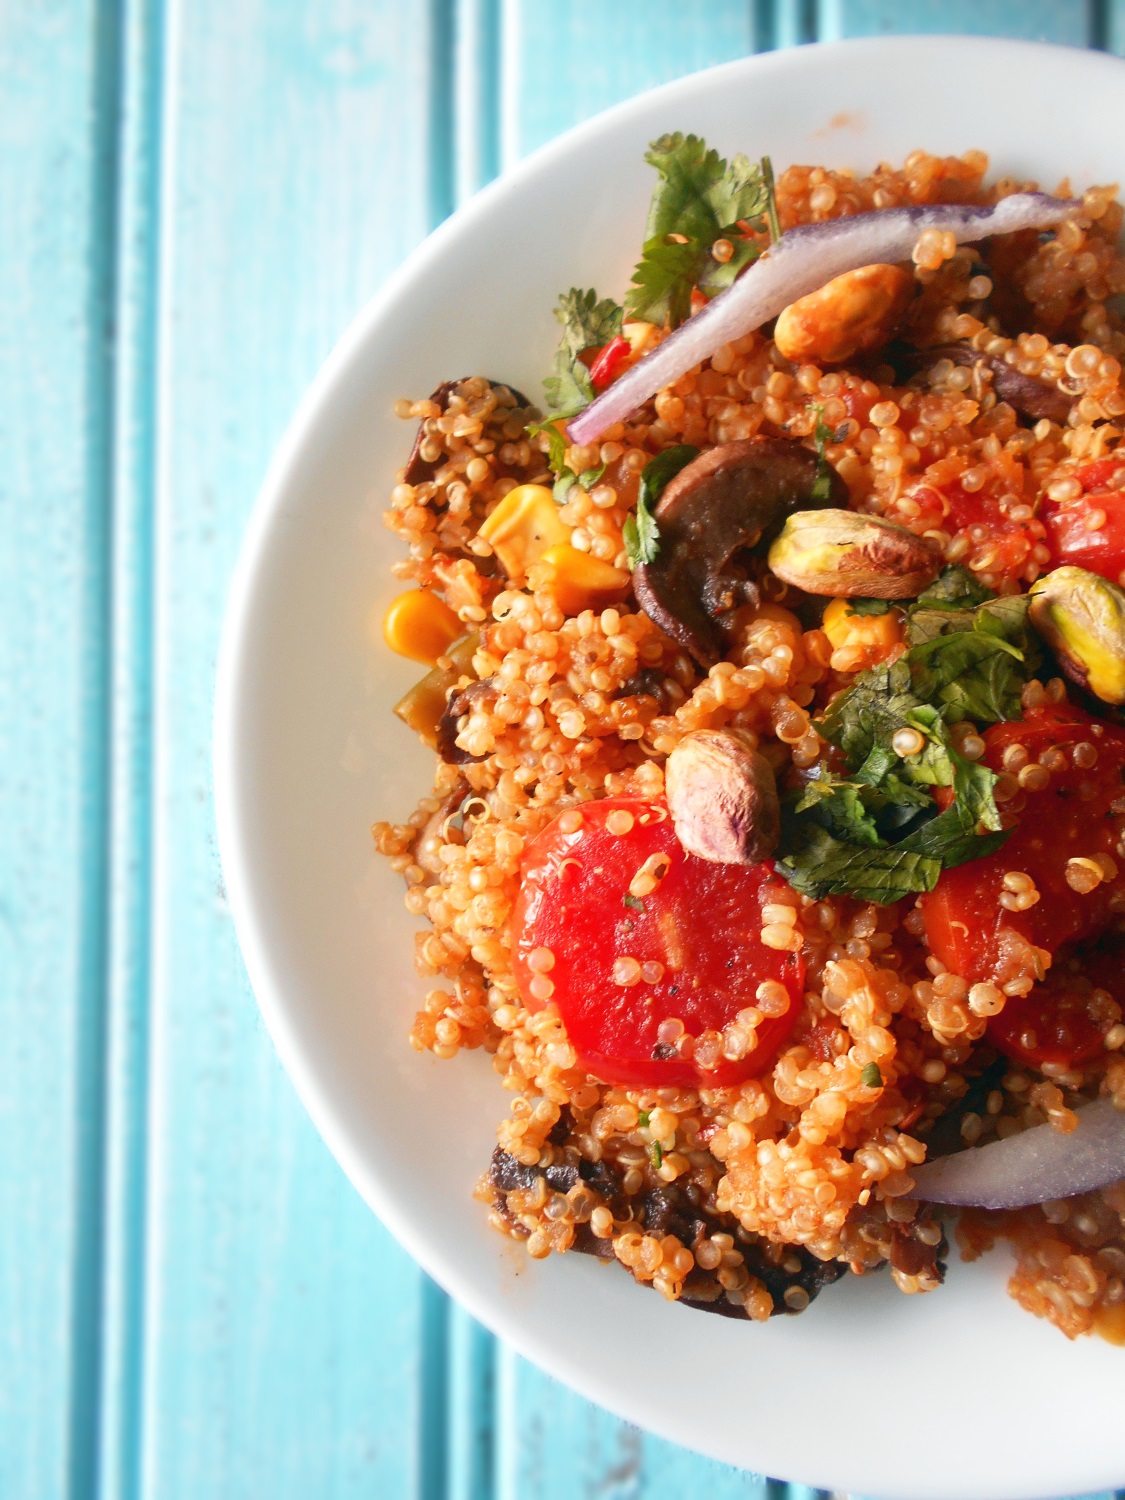 4. One Pot Healthy Dinner with Quinoa